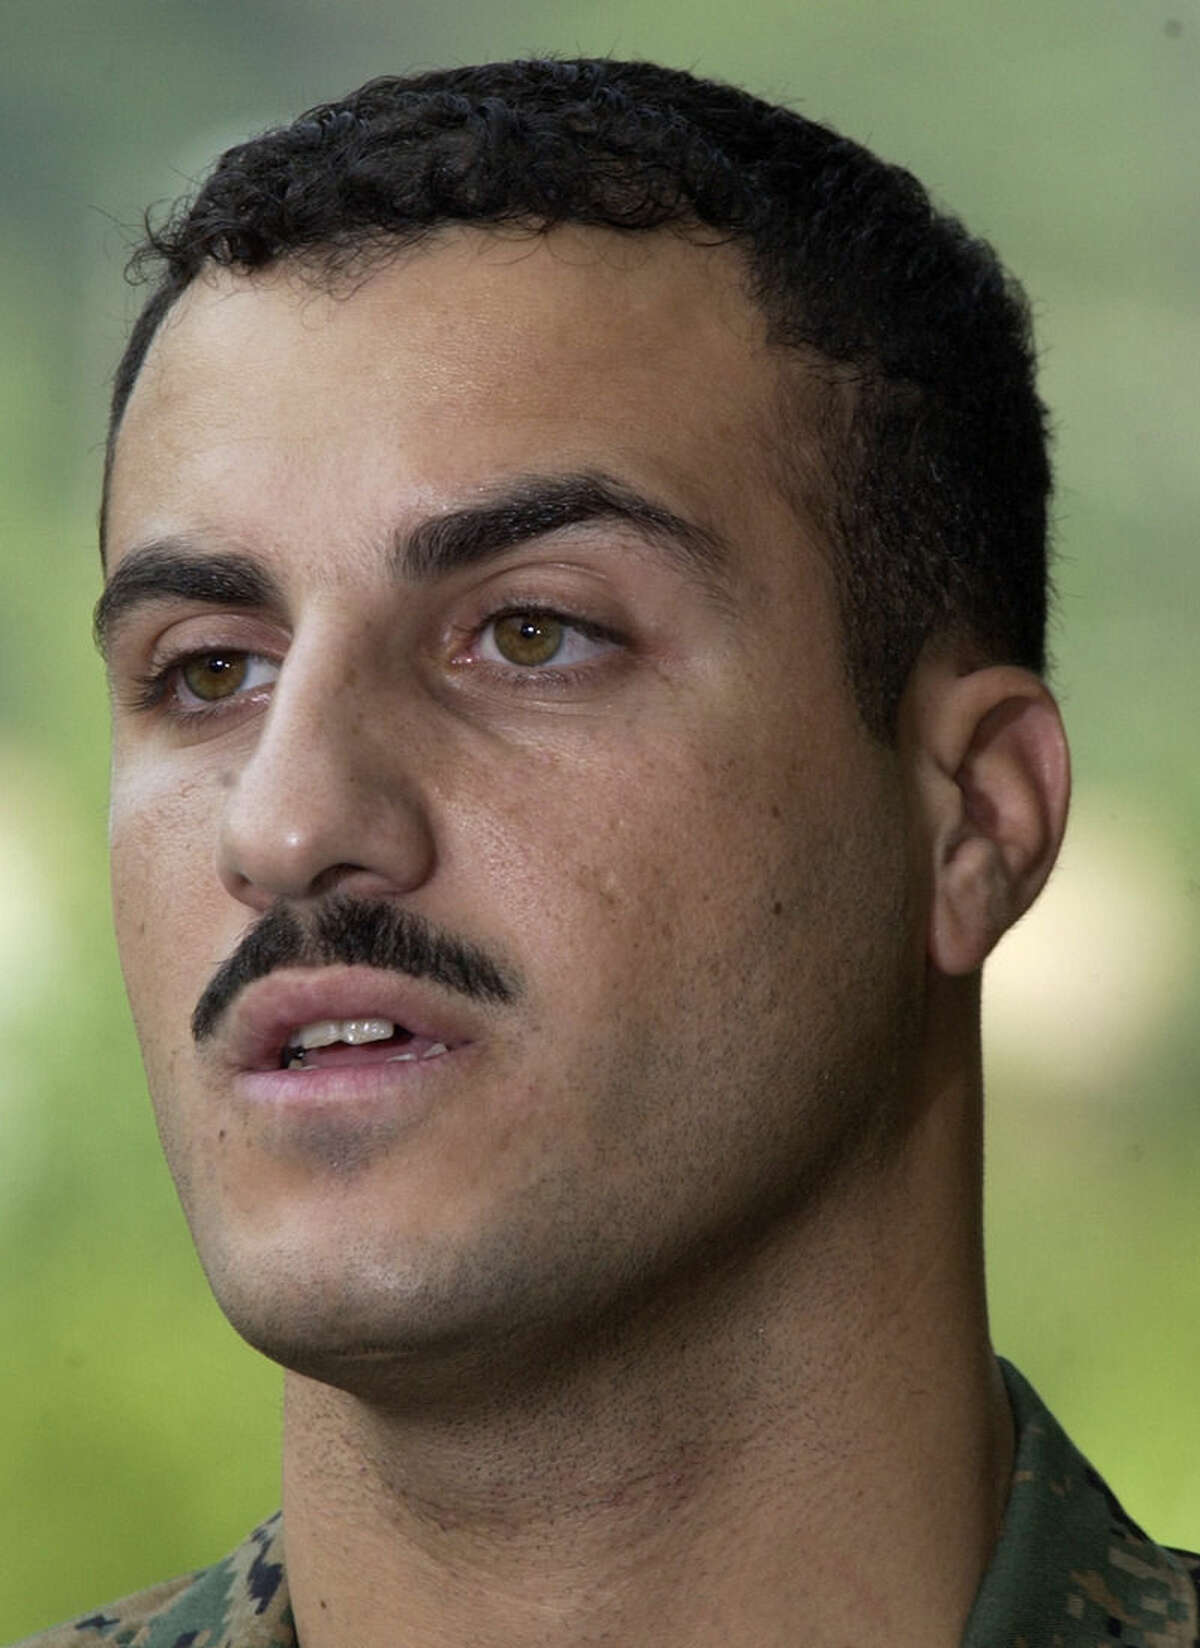 FILE - In this July 19, 2004 file photo, Marine Cpl. Wassef Ali Hassoun makes a statement to the press outside Quantico Marine Base in Quantico, Va. Hassoun's trial on desertion accusations starts Monday, Feb. 9, 2015 at Camp Lejeune, N.C. (AP Photo/Steve Helber, File)